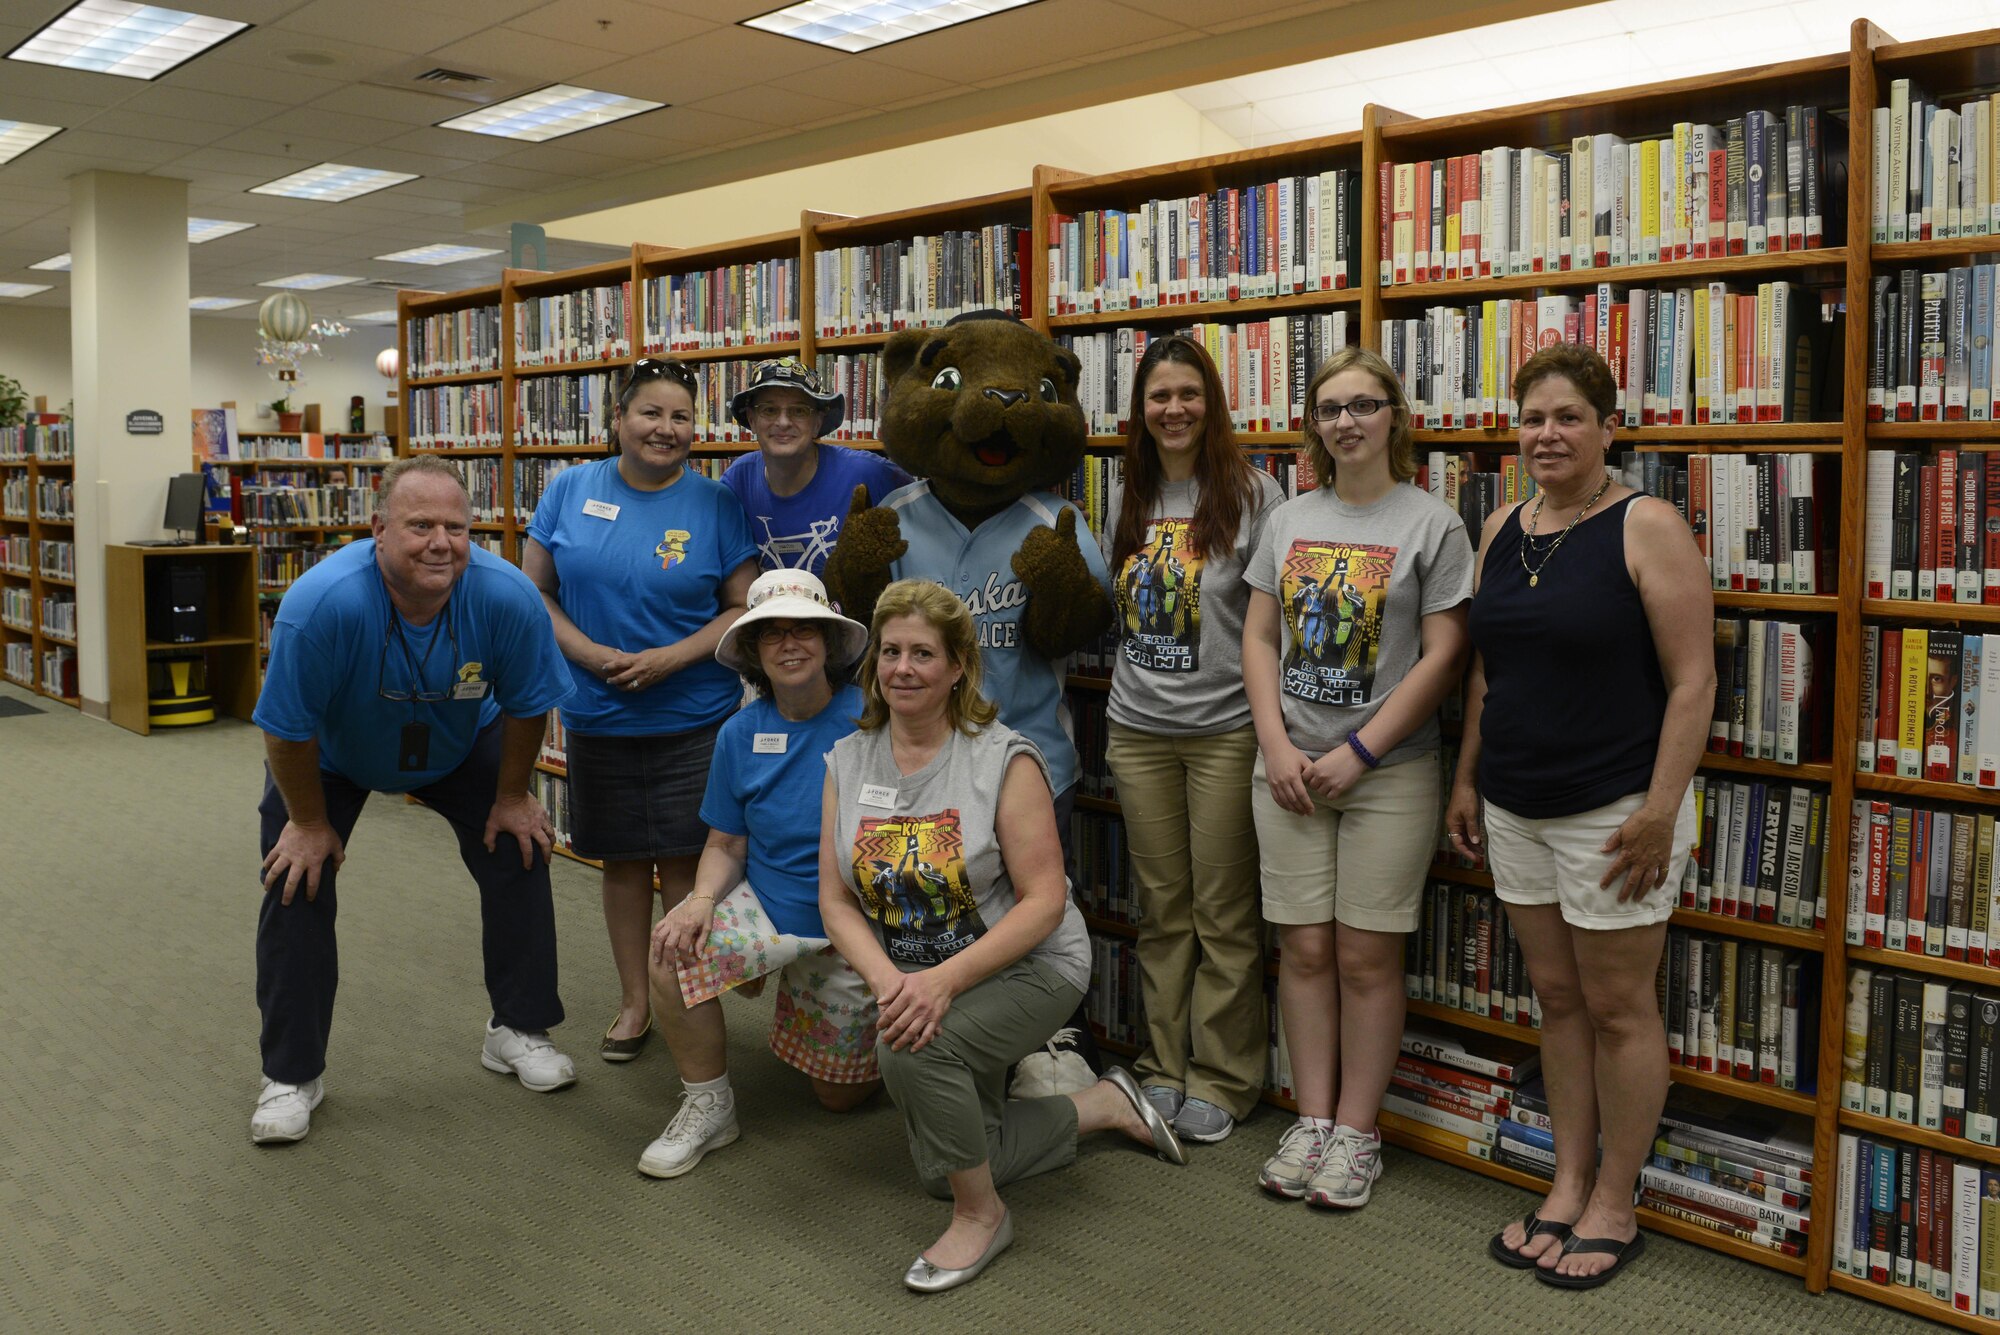 Joint Base Elmendorf-Richardson Library staff gather with Kodi from the Alaska Aces at the JBER Library, June 16, 2016. The program’s theme this year is sports and will give the JBER community the opportunity to collect prizes for time spent reading. (U.S. Air Force photo by Airman 1st Class Valerie Monroy)